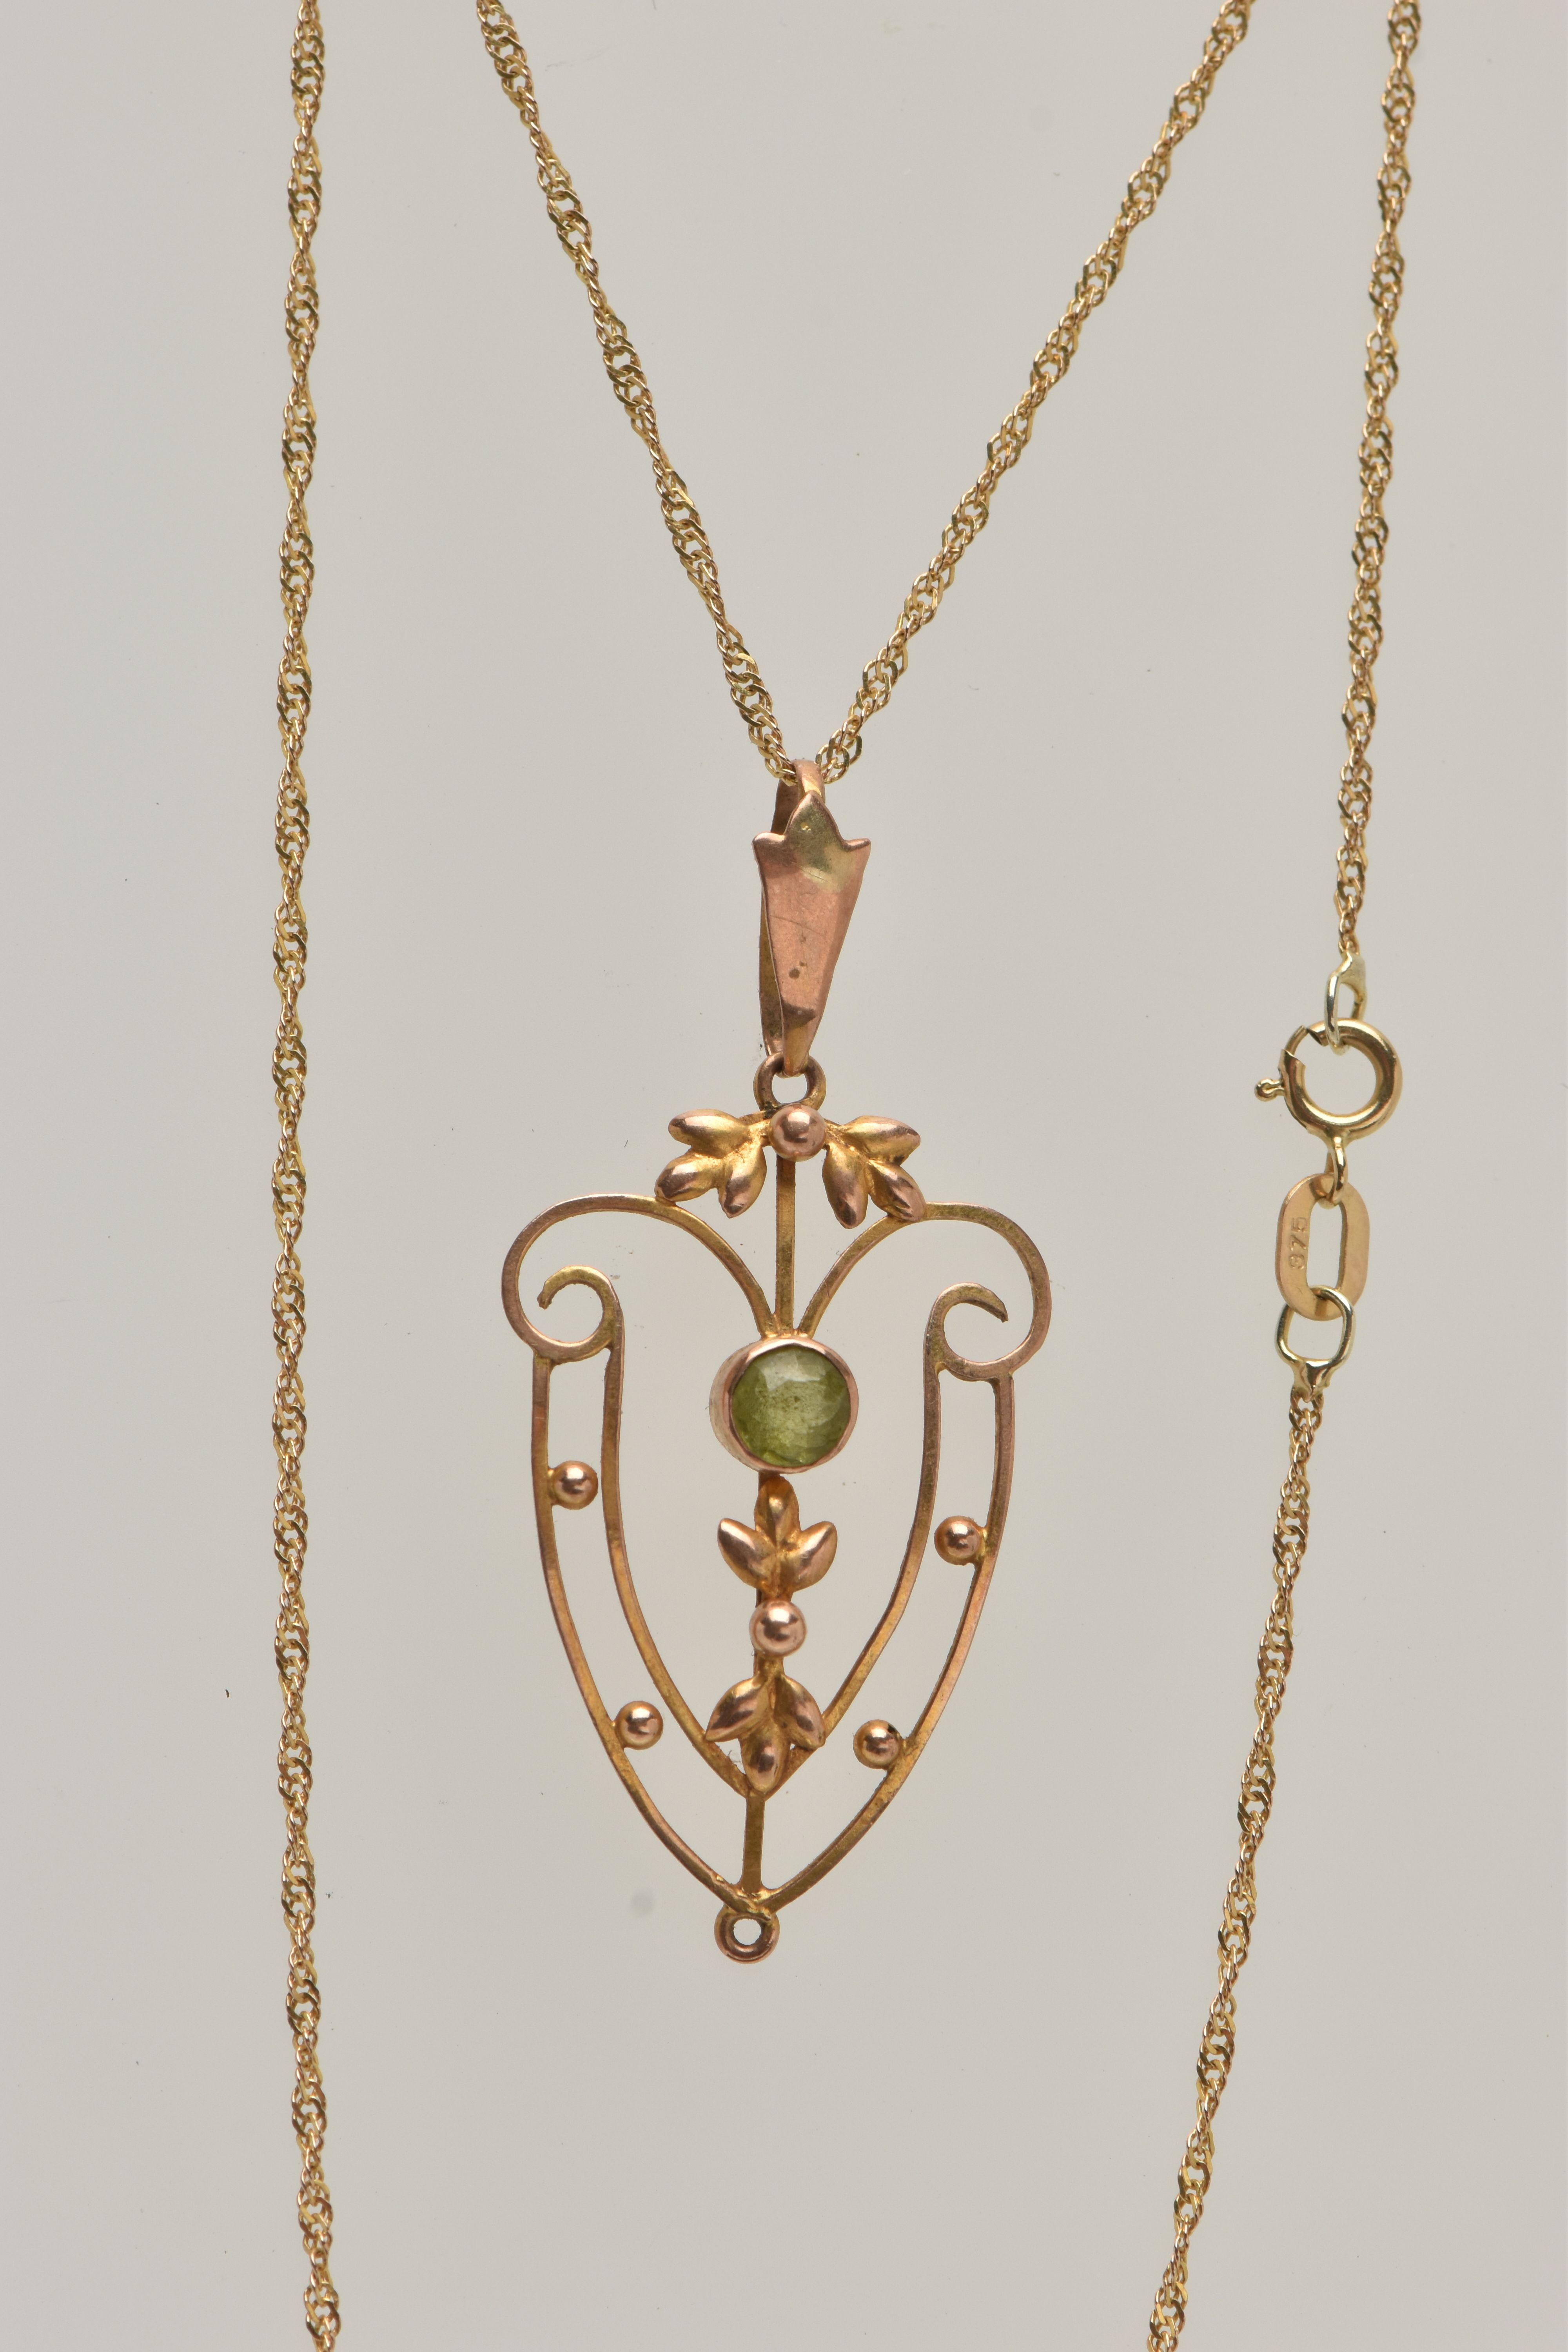 AN EDWARDIAN PENDANT AND CHAIN, open work floral pendant, set with a circular cut peridot, missing